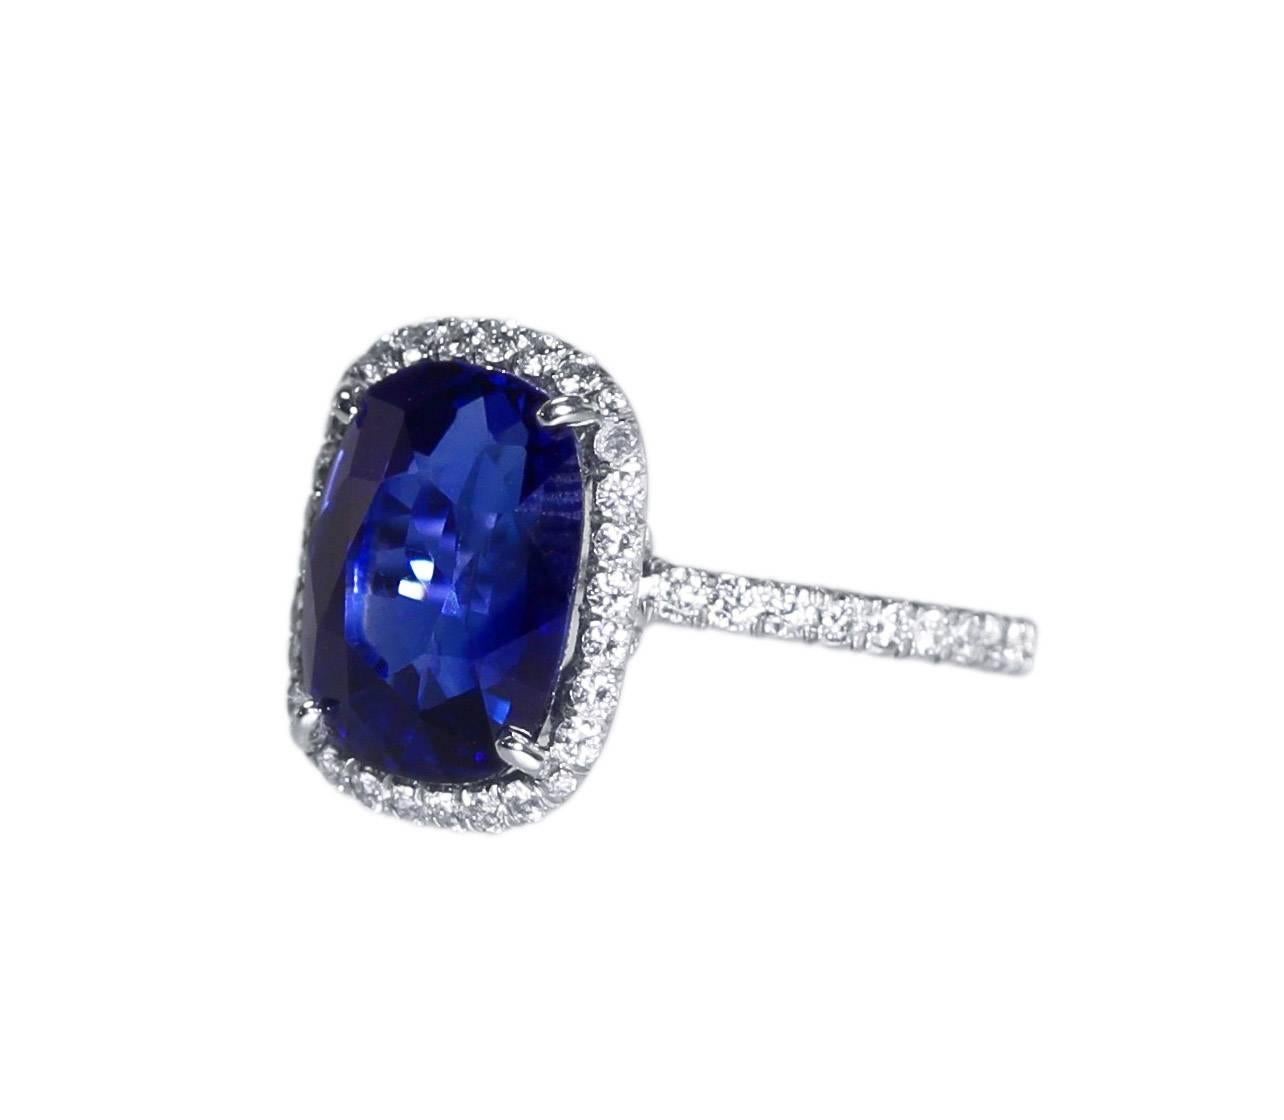 A platinum, sapphire and diamond ring, set in the center with a cushion-shaped sapphire weighing 7.84 carats, framed and flanked by 92 round diamonds weighing approximately 1.15 carats, measuring 1/2 by 3/4 by 1 inch, gross weight 5.4 grams, finger